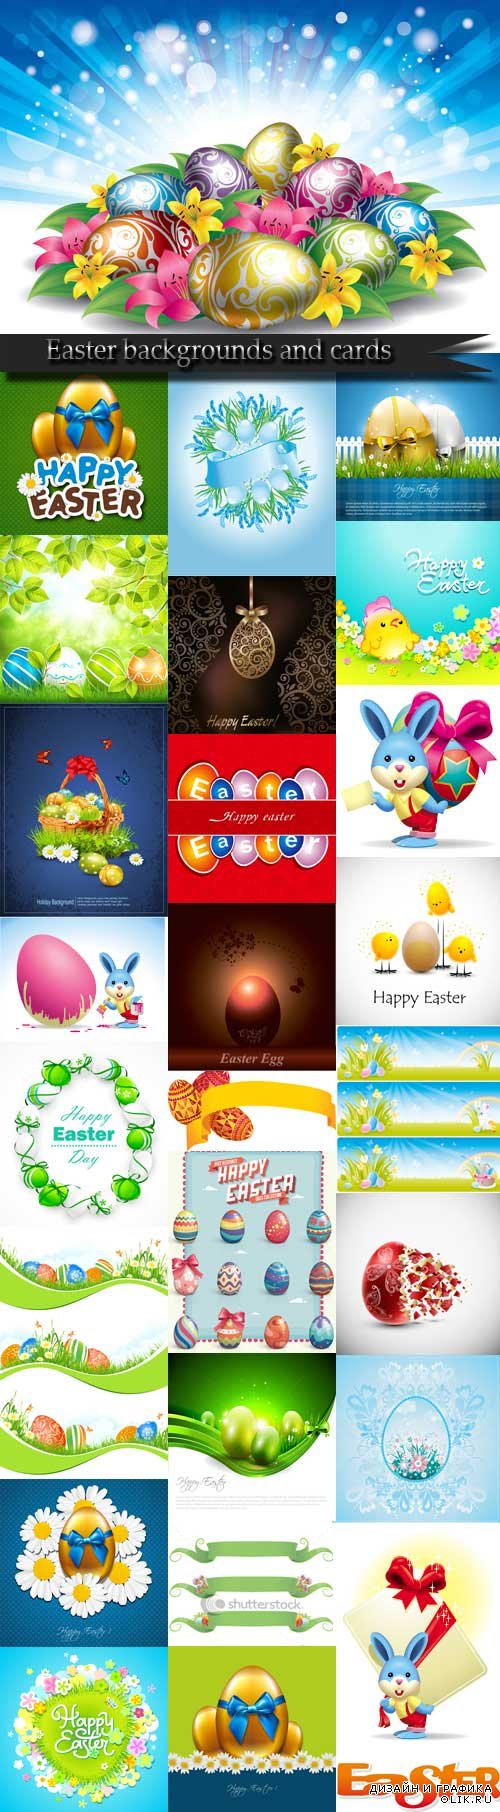 Easter backgrounds and cards vector